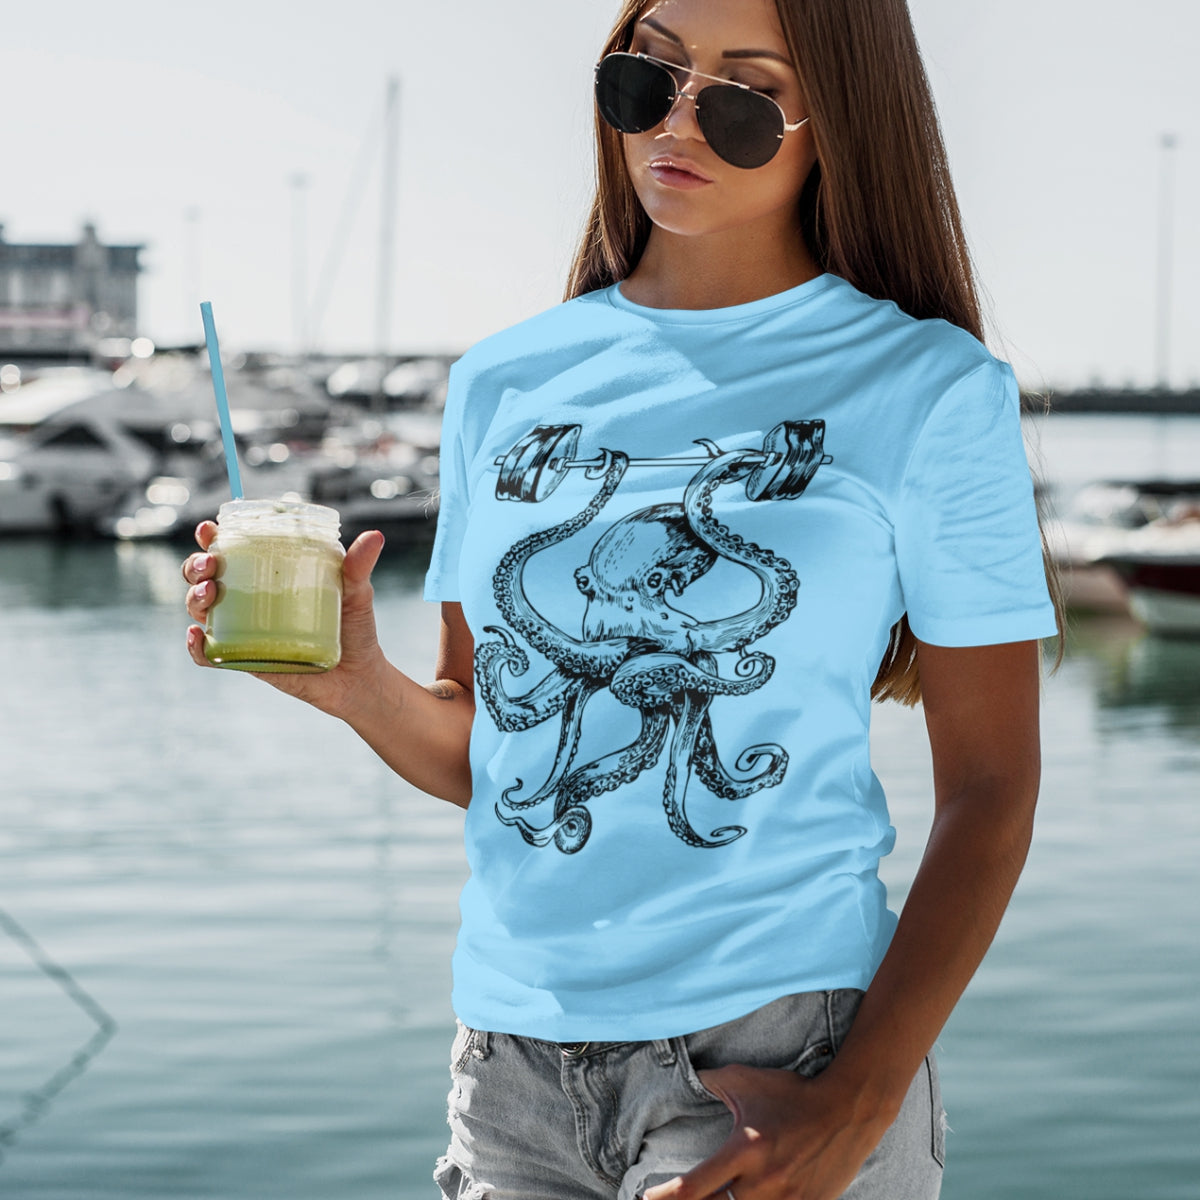 seembo-t-shirt-woman-octopus-workout-weight-lifting-barbell-and-drinking-a-smoothie